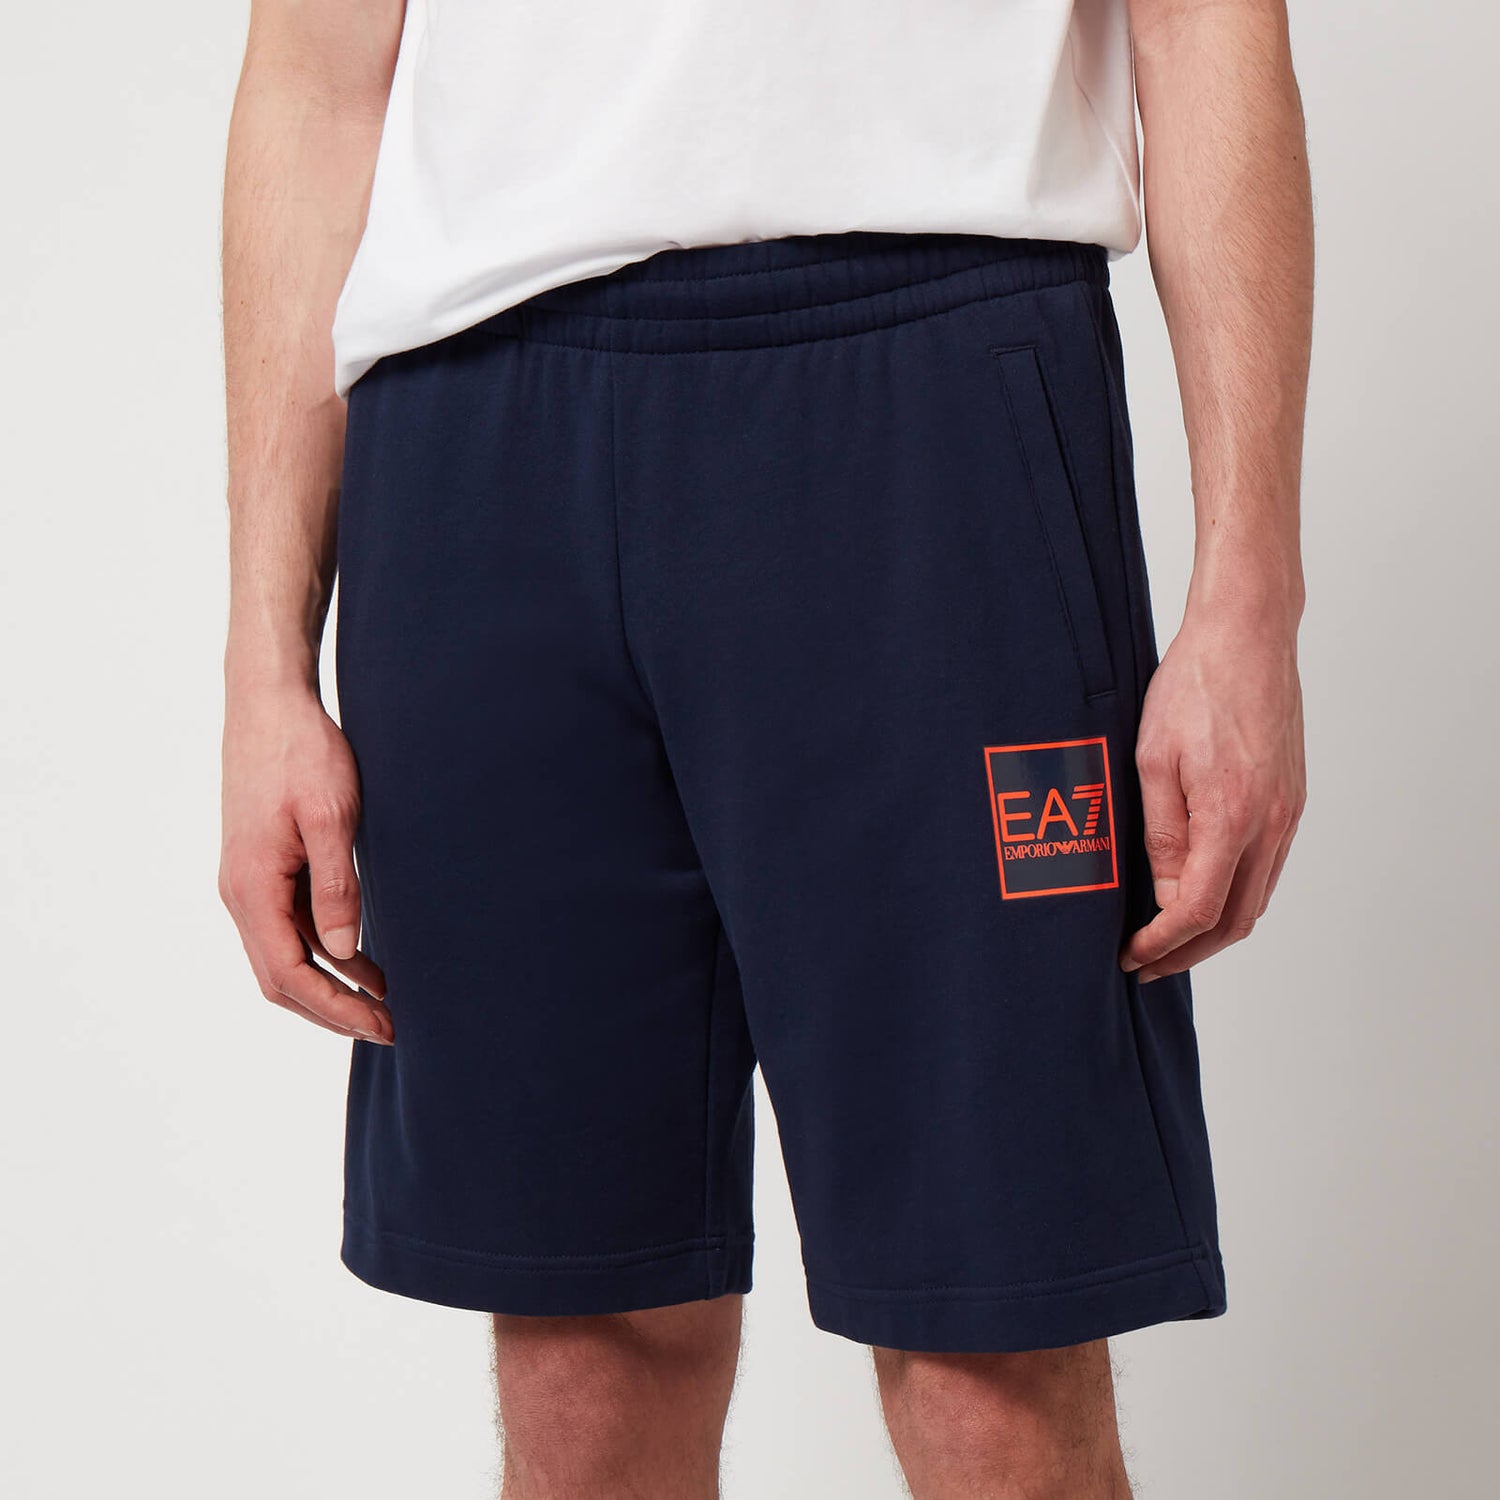 EA7 Men's Graphic Series French Terry Jersey Shorts - Navy Blue